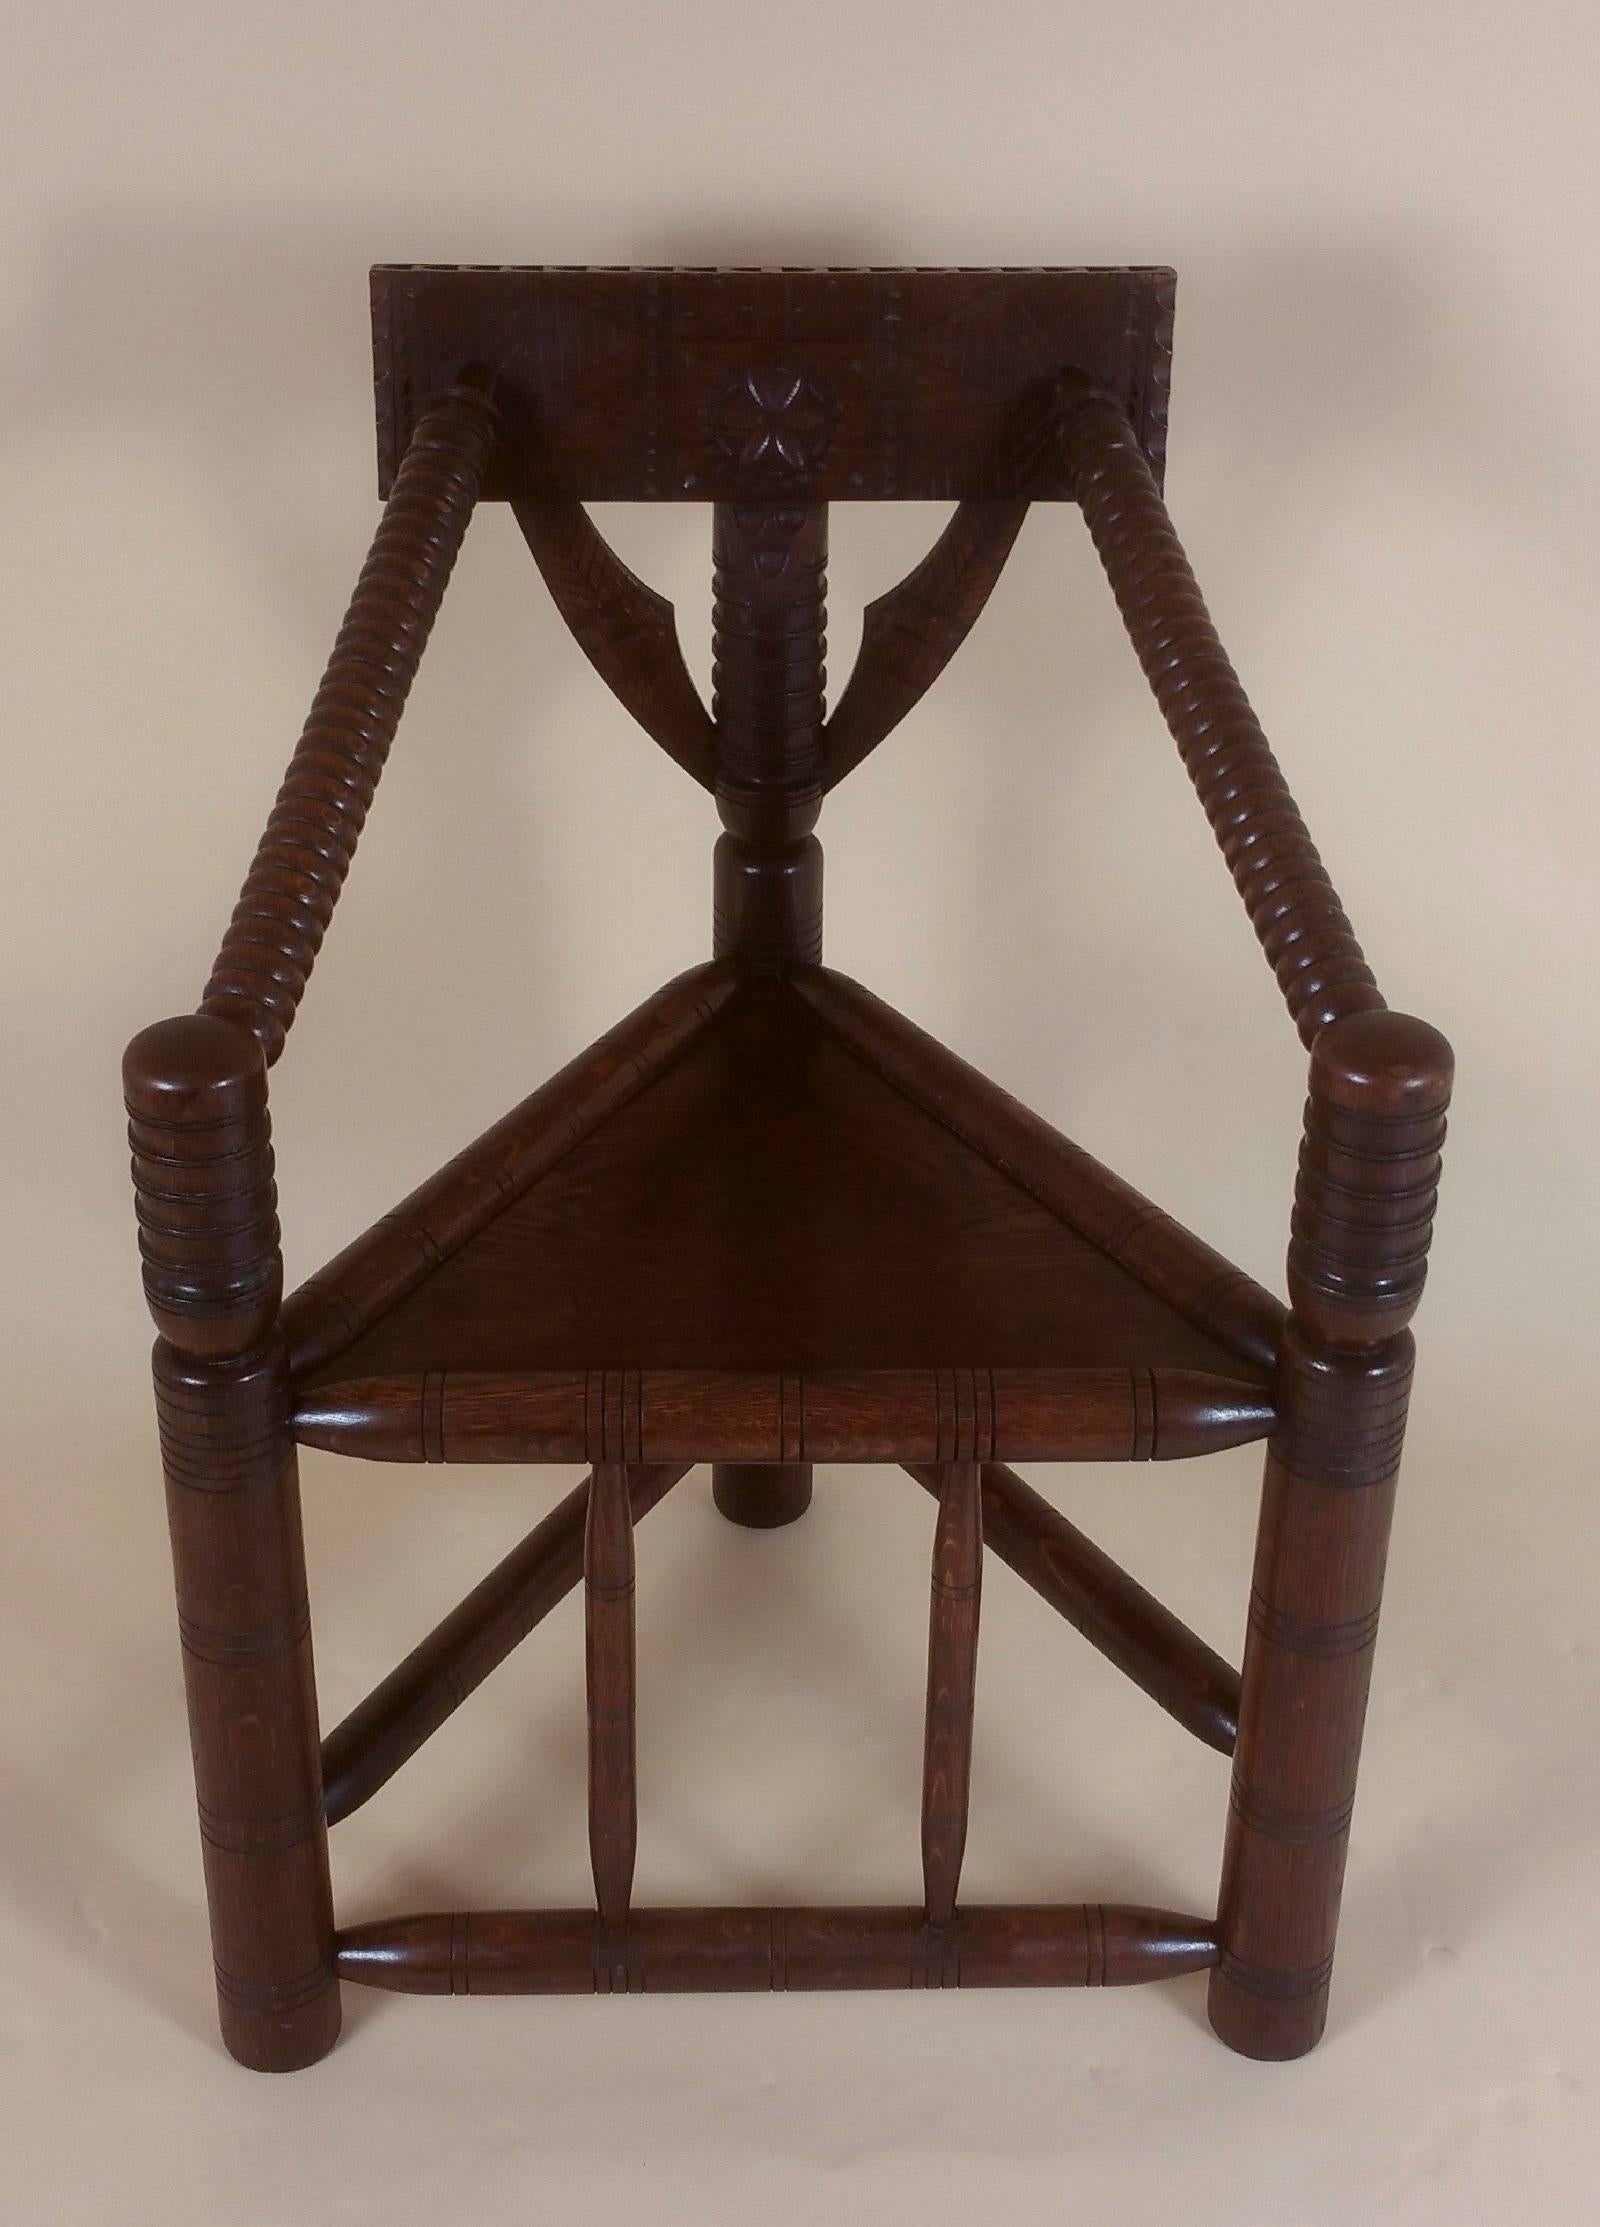 This unusual and finely crafted corner chair is in the ‘Turners’ style and features a lovely warm patina with detailed carved decoration. The chair measures 24 ½ in – 62.2 cm wide, 22 in – 56 cm deep and 34 in – 86.3 cm in height with a seat height